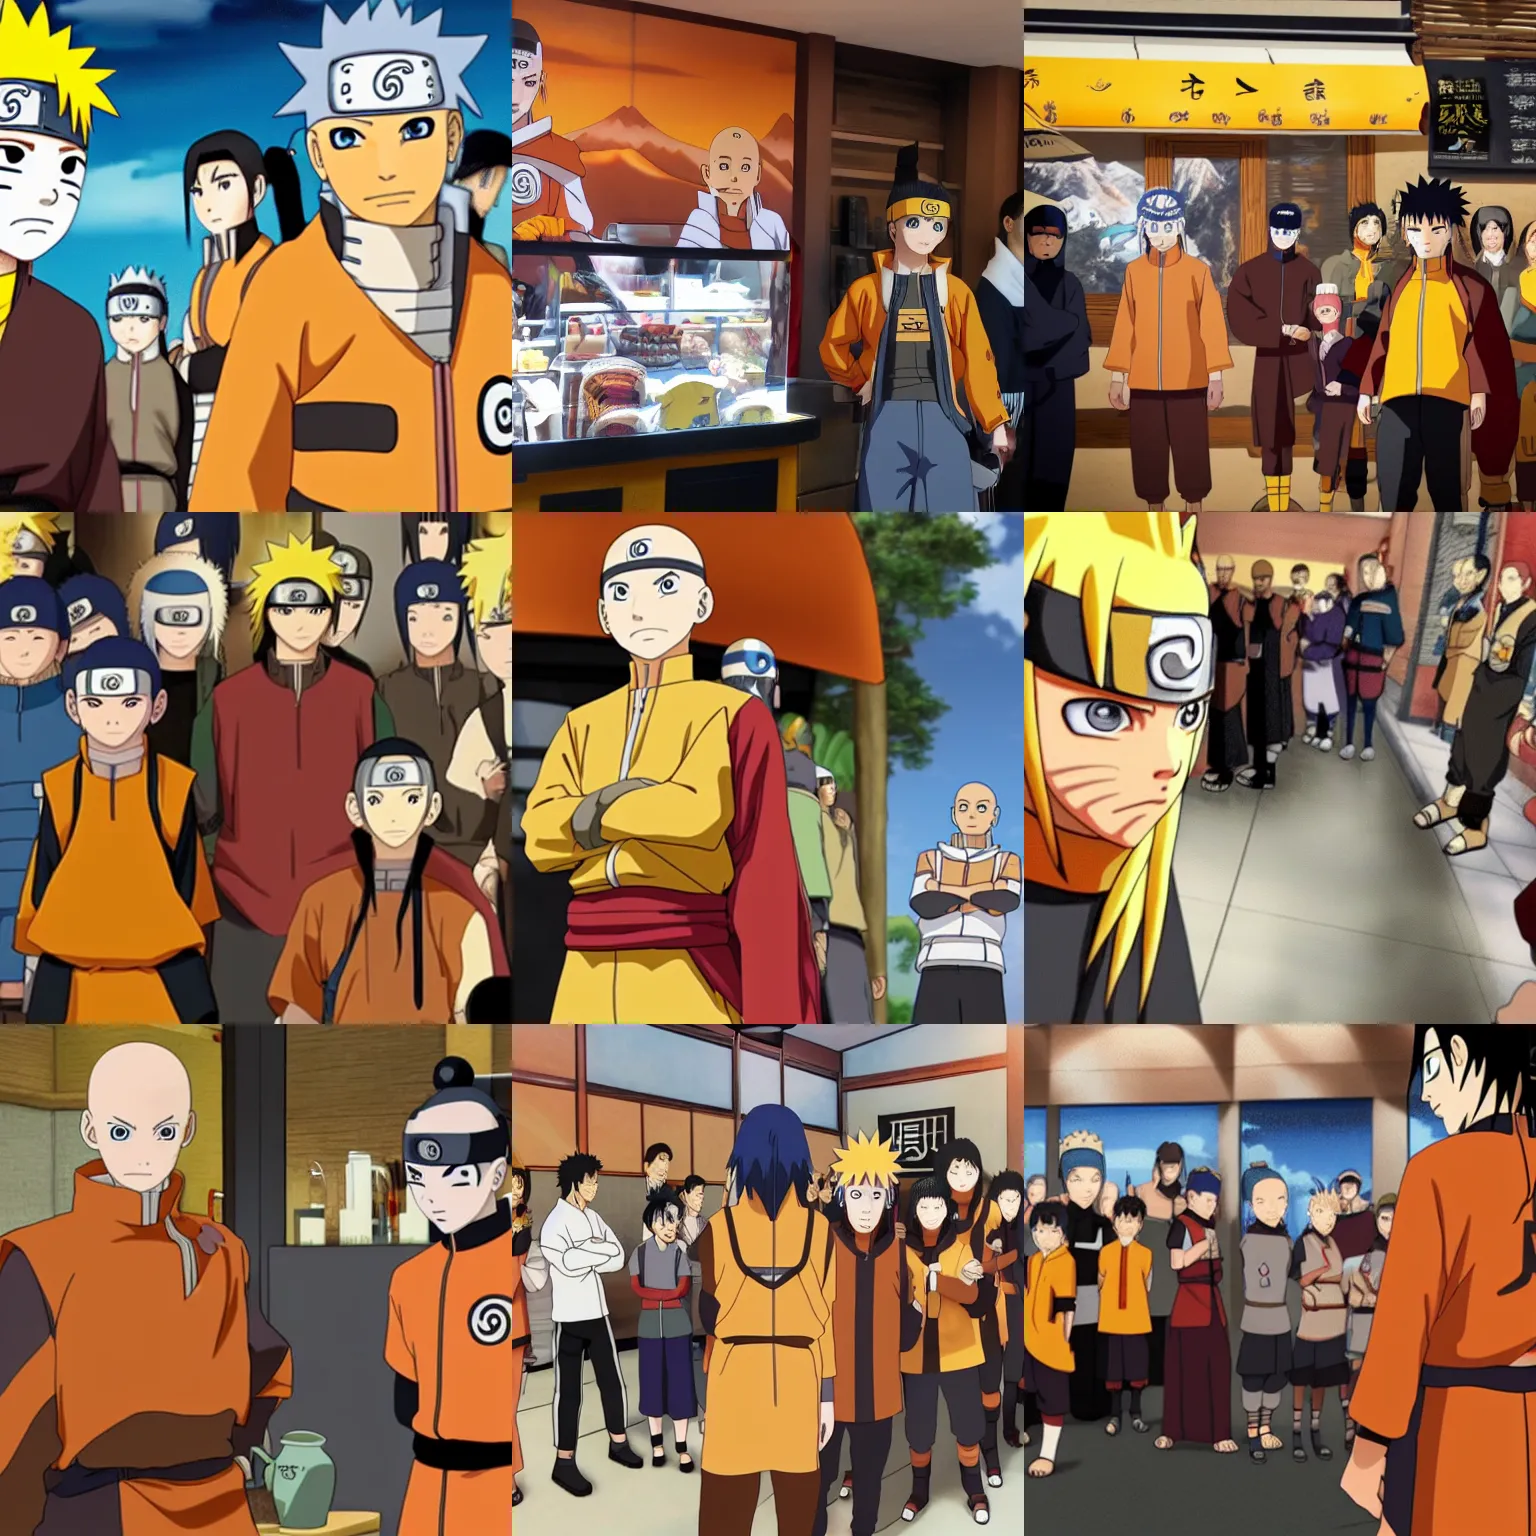 Prompt: Naruto waiting in line behind Avatar the last airbender in a coffee place